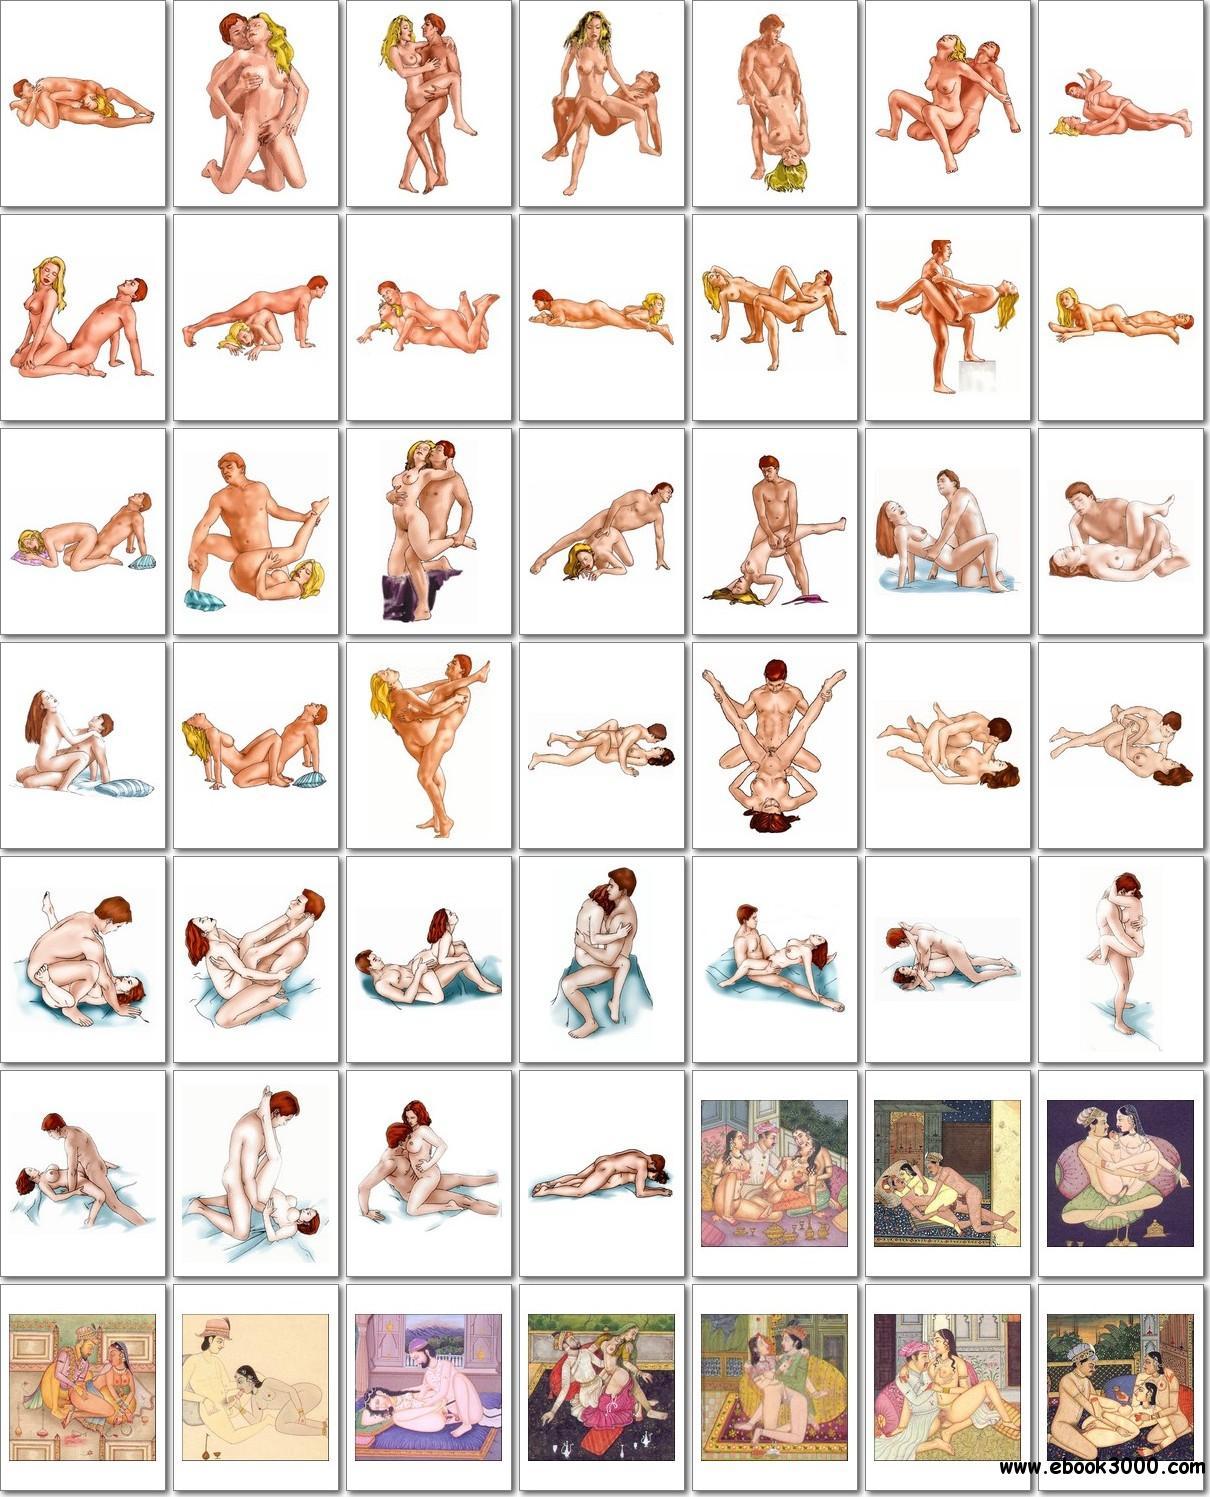 Kama sutra sex position guide Sex Positions Kama Sutra Sexy most watched pic 100% free